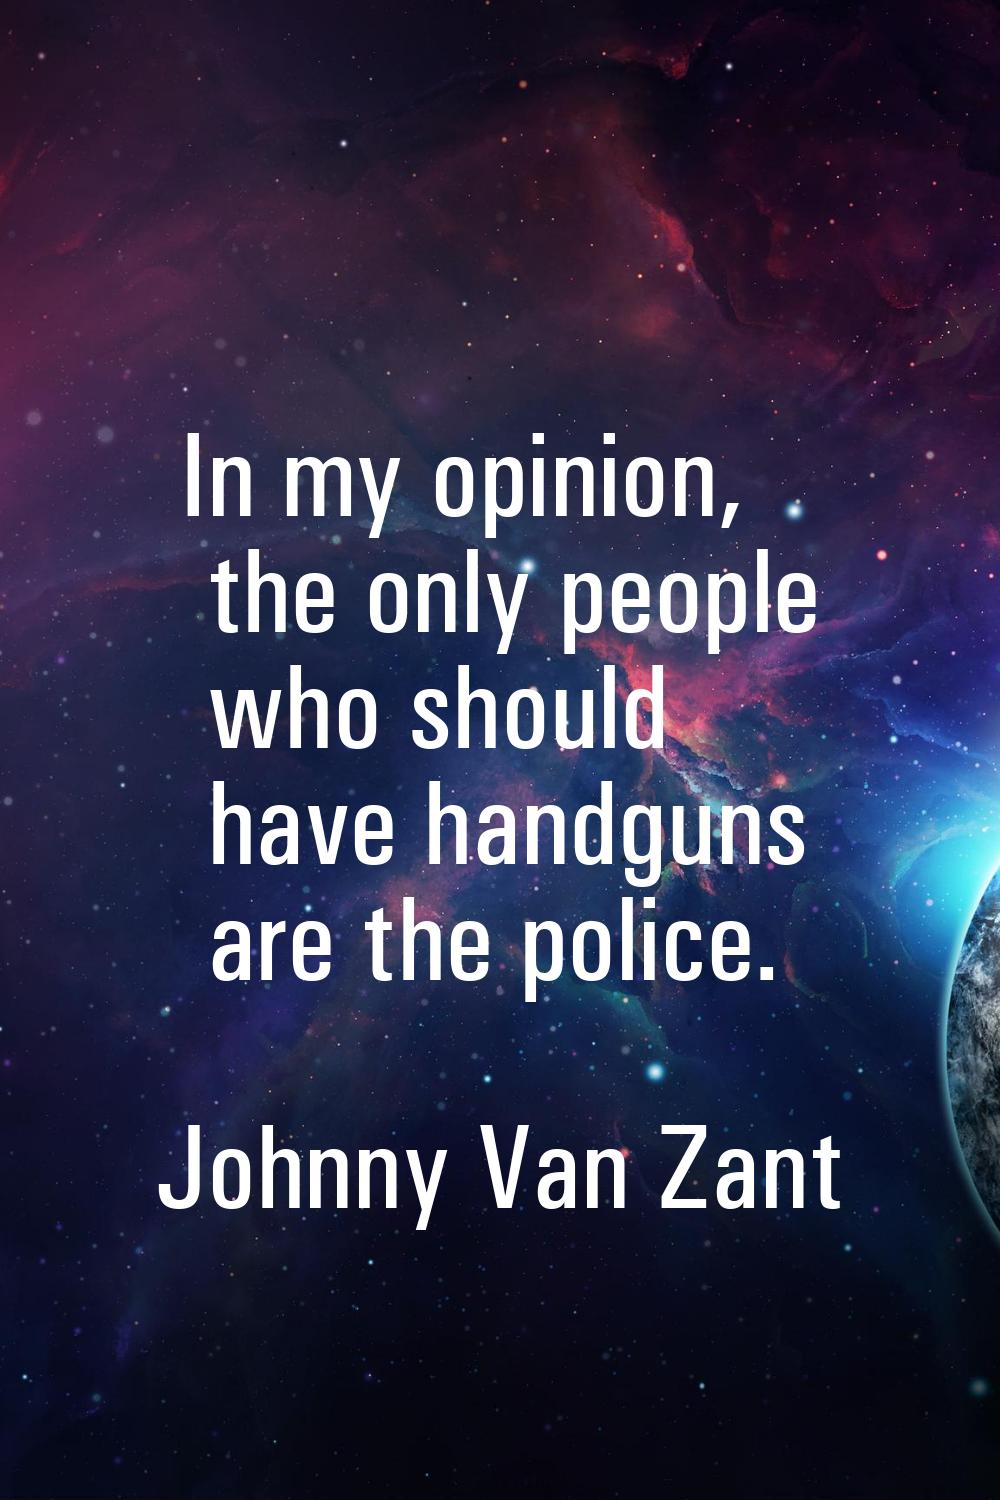 In my opinion, the only people who should have handguns are the police.